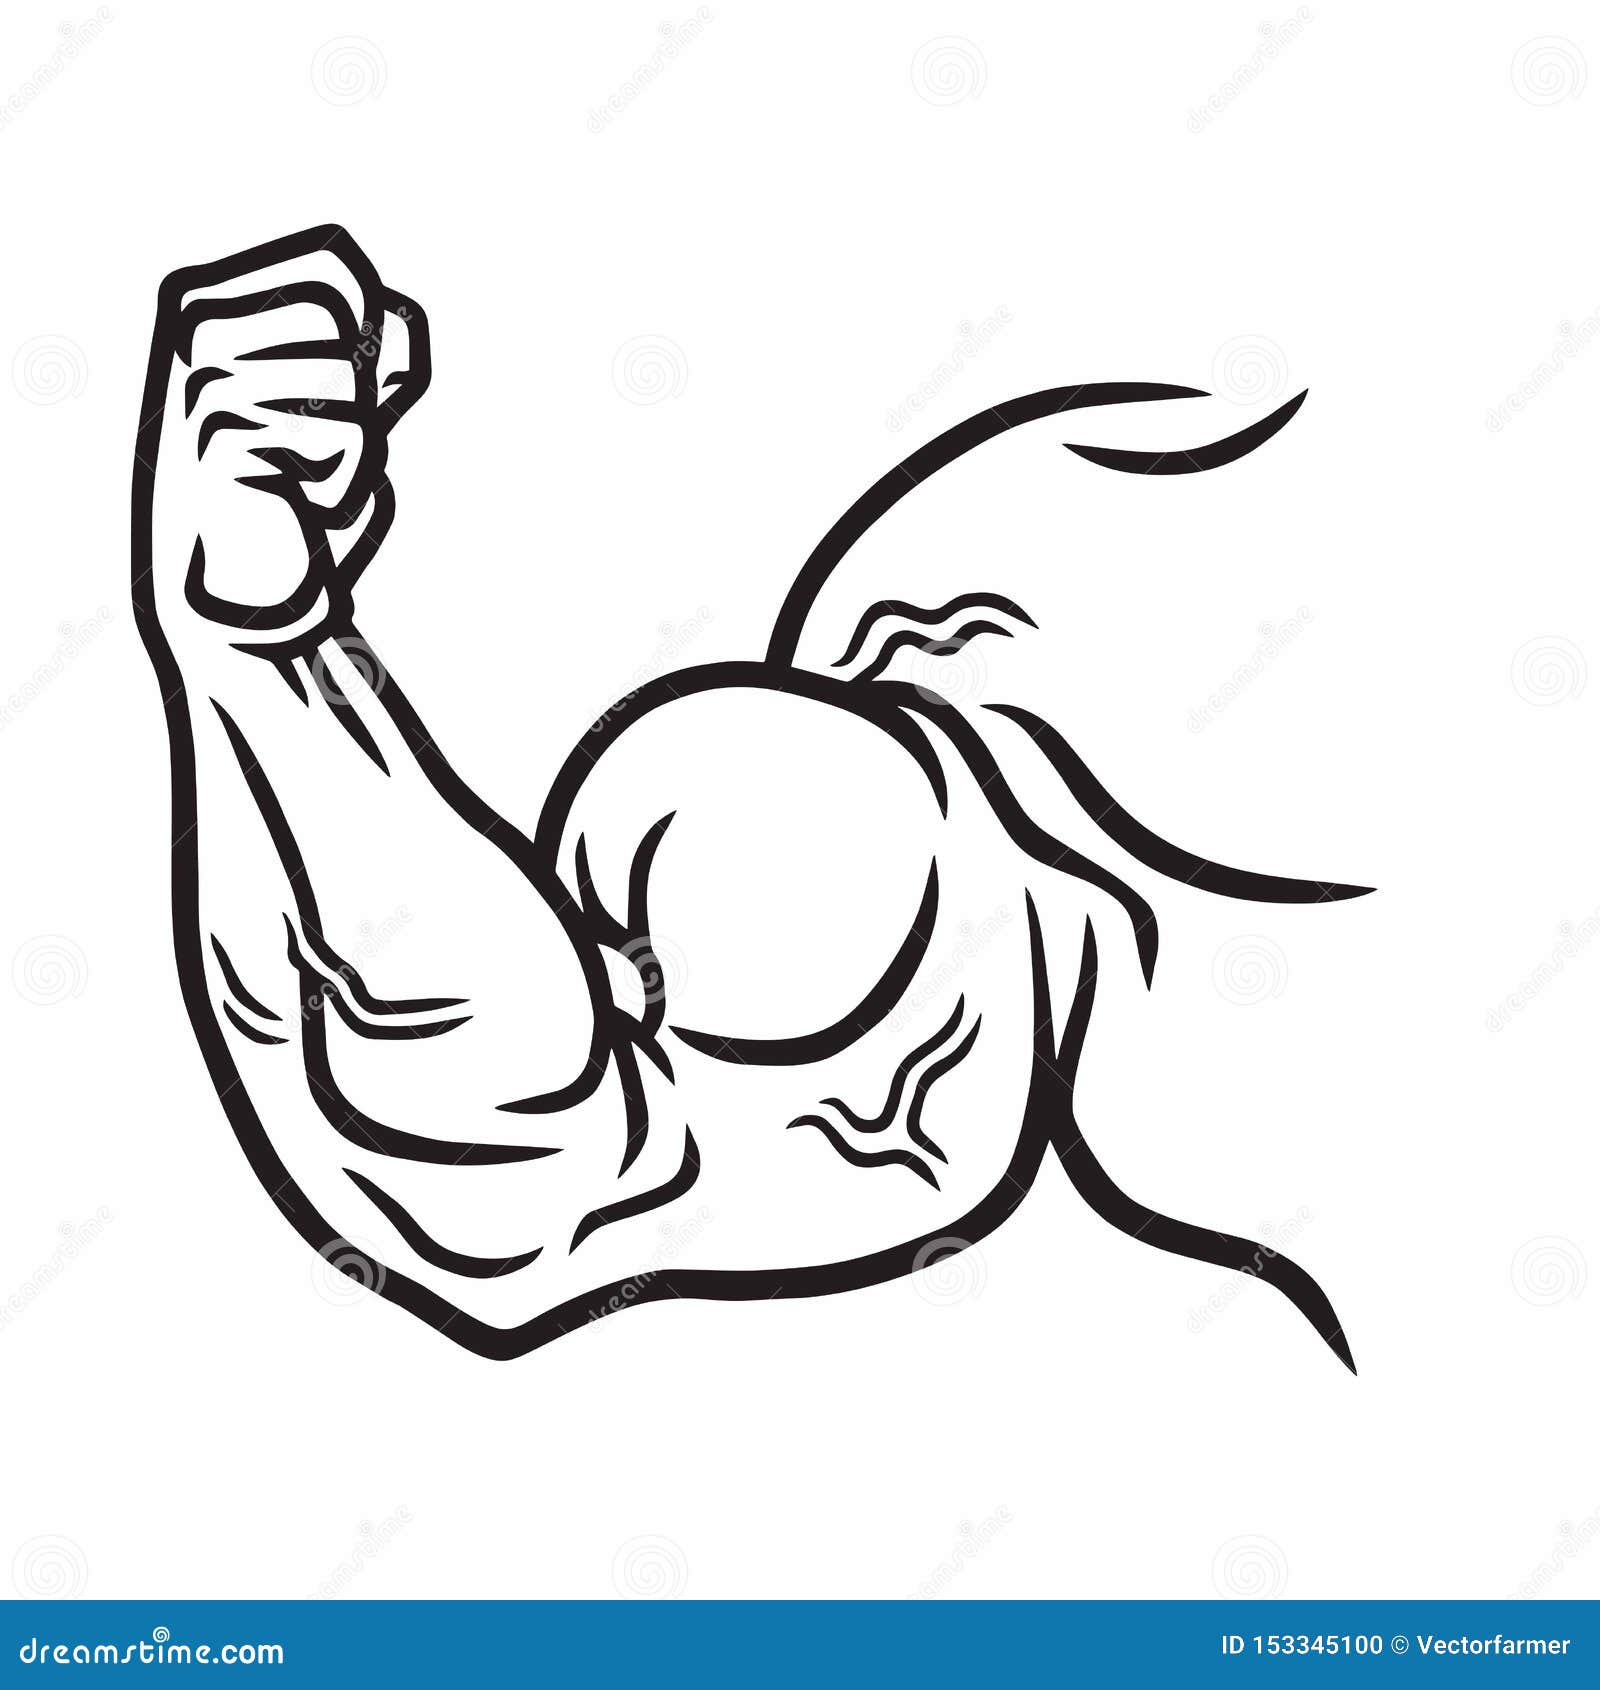 https://thumbs.dreamstime.com/z/muscular-strong-arm-powerful-hand-bicep-gym-bodybuilding-sport-vector-doodle-illustration-icon-153345100.jpg